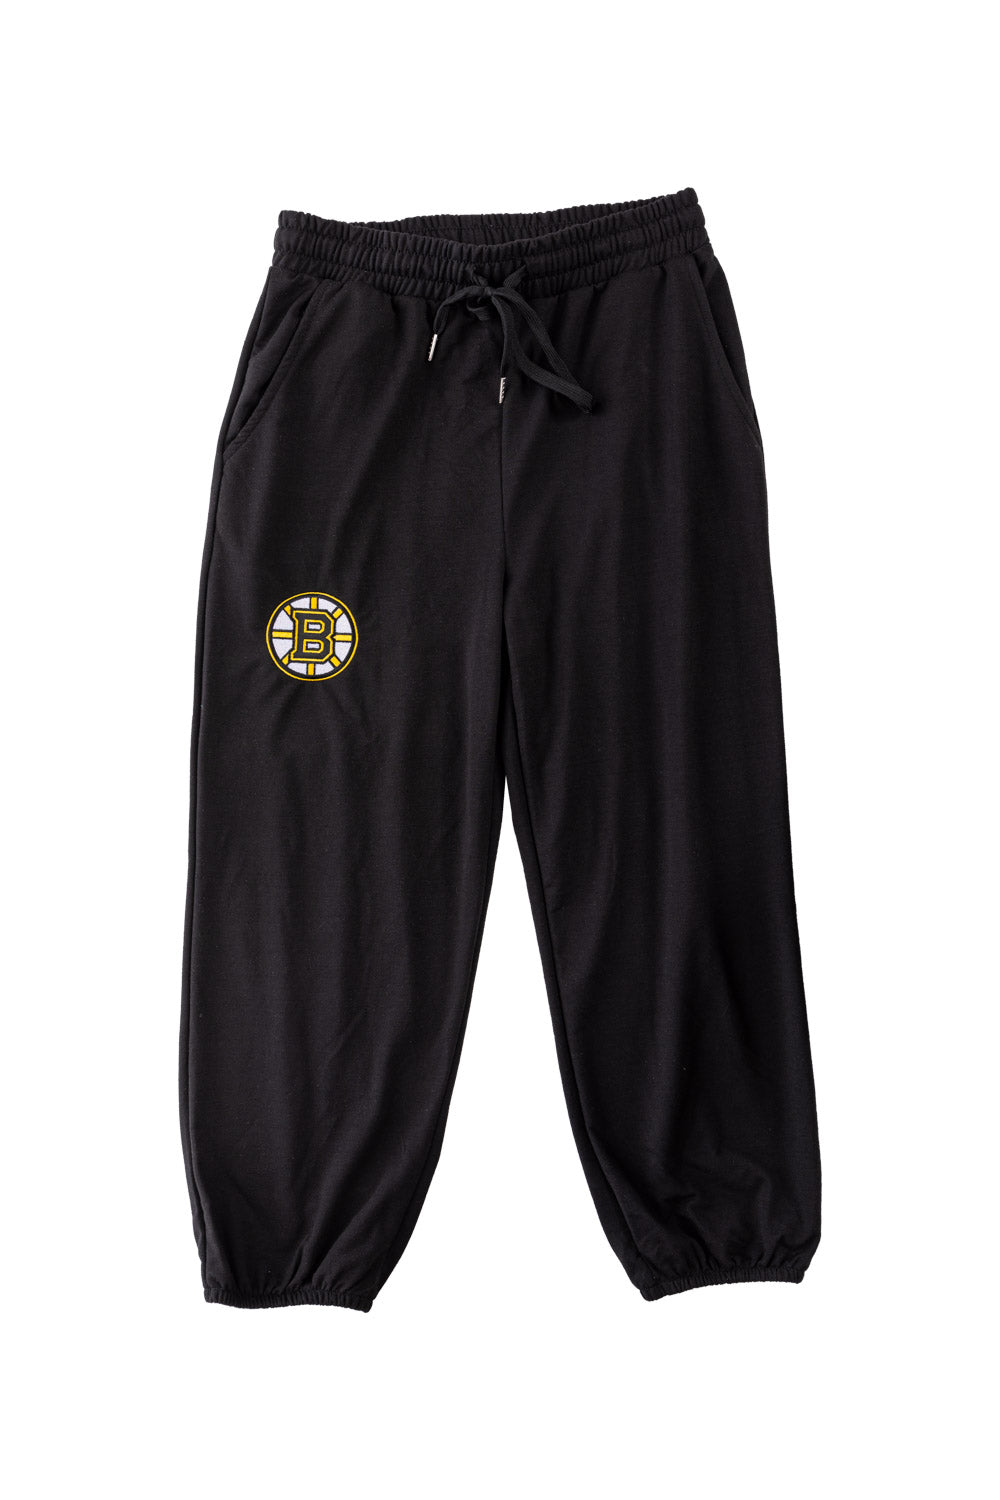 Boston Bruins Ladies Cropped Jogger Style Track Pants